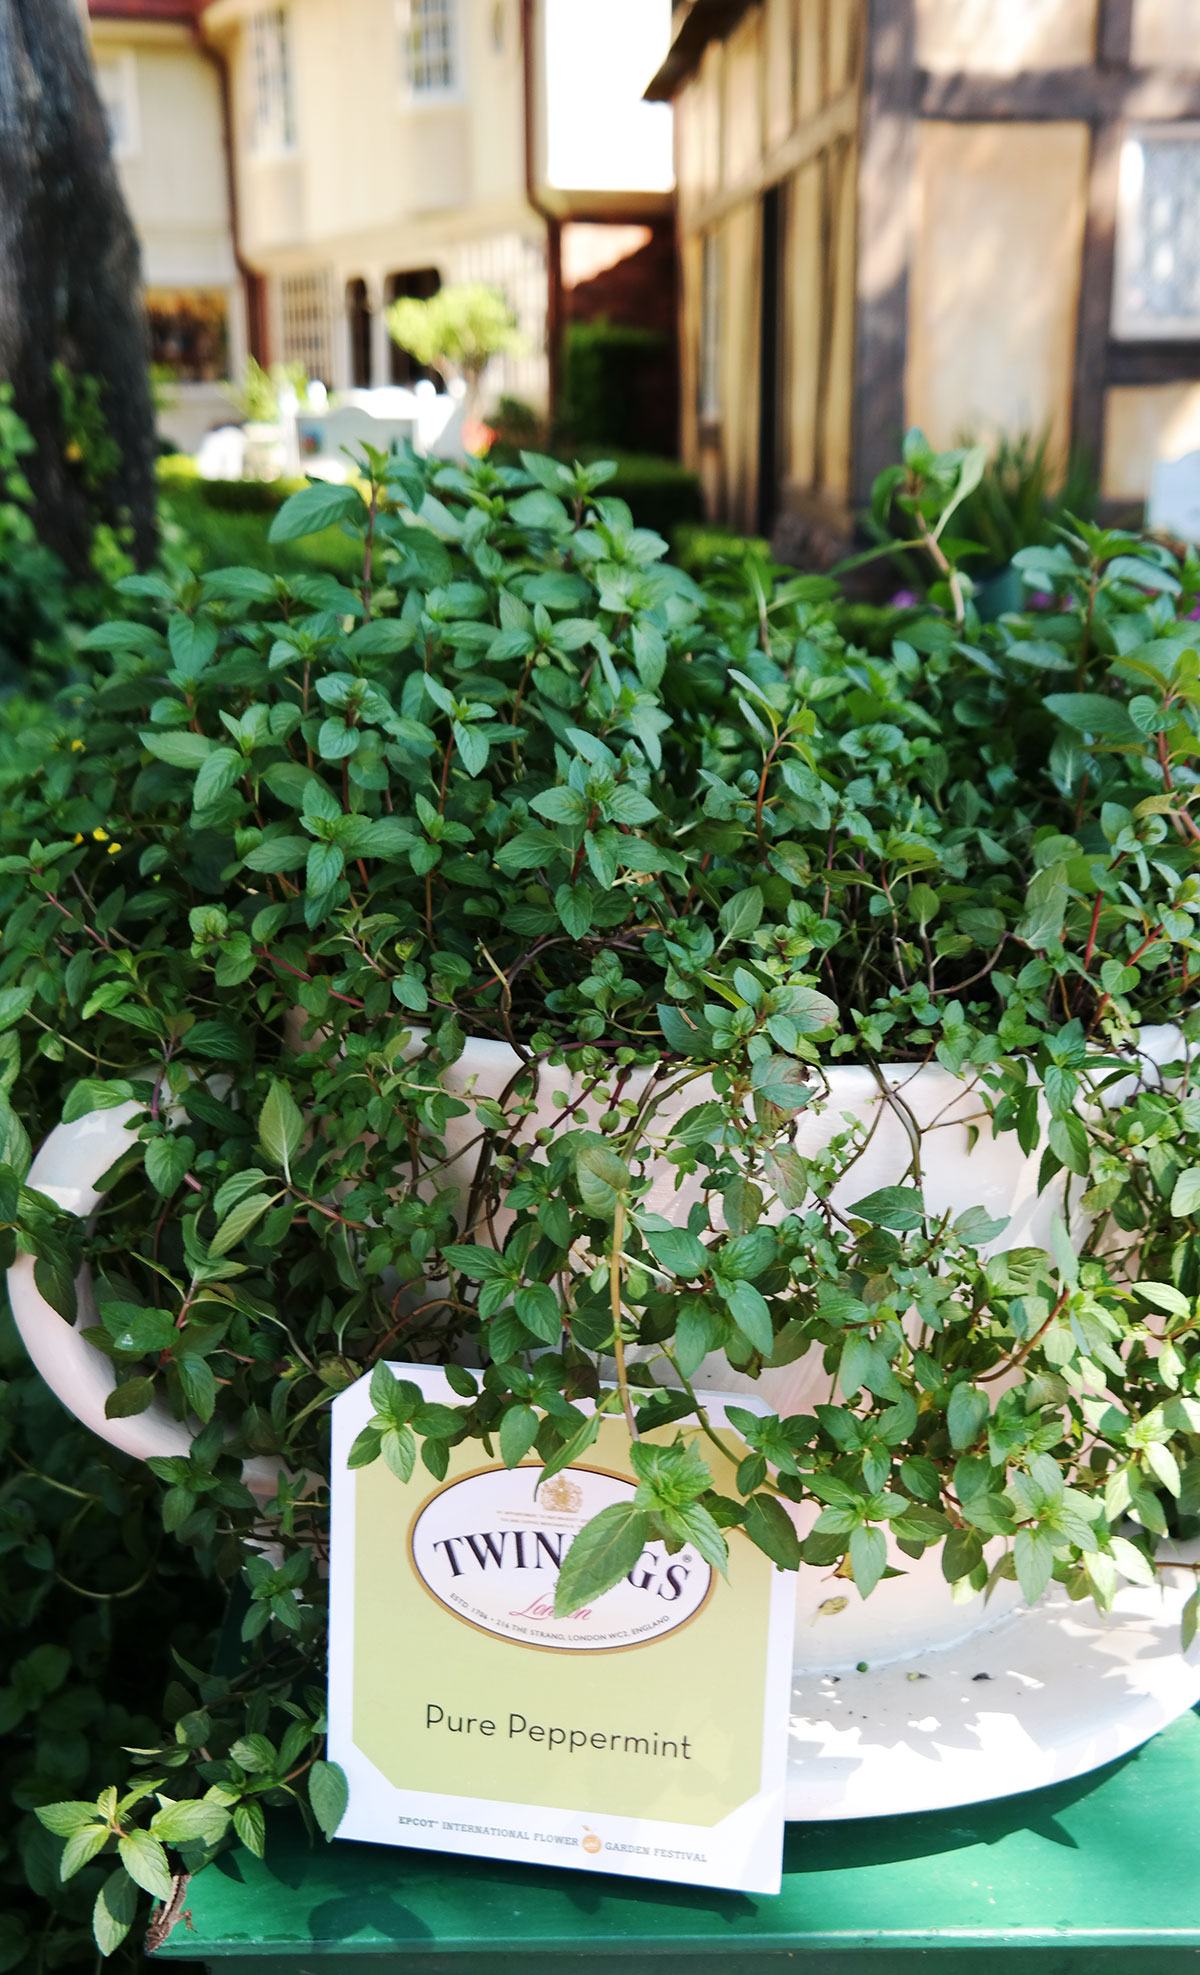 Peppermint tea growing at Epcot's World Showcase UK